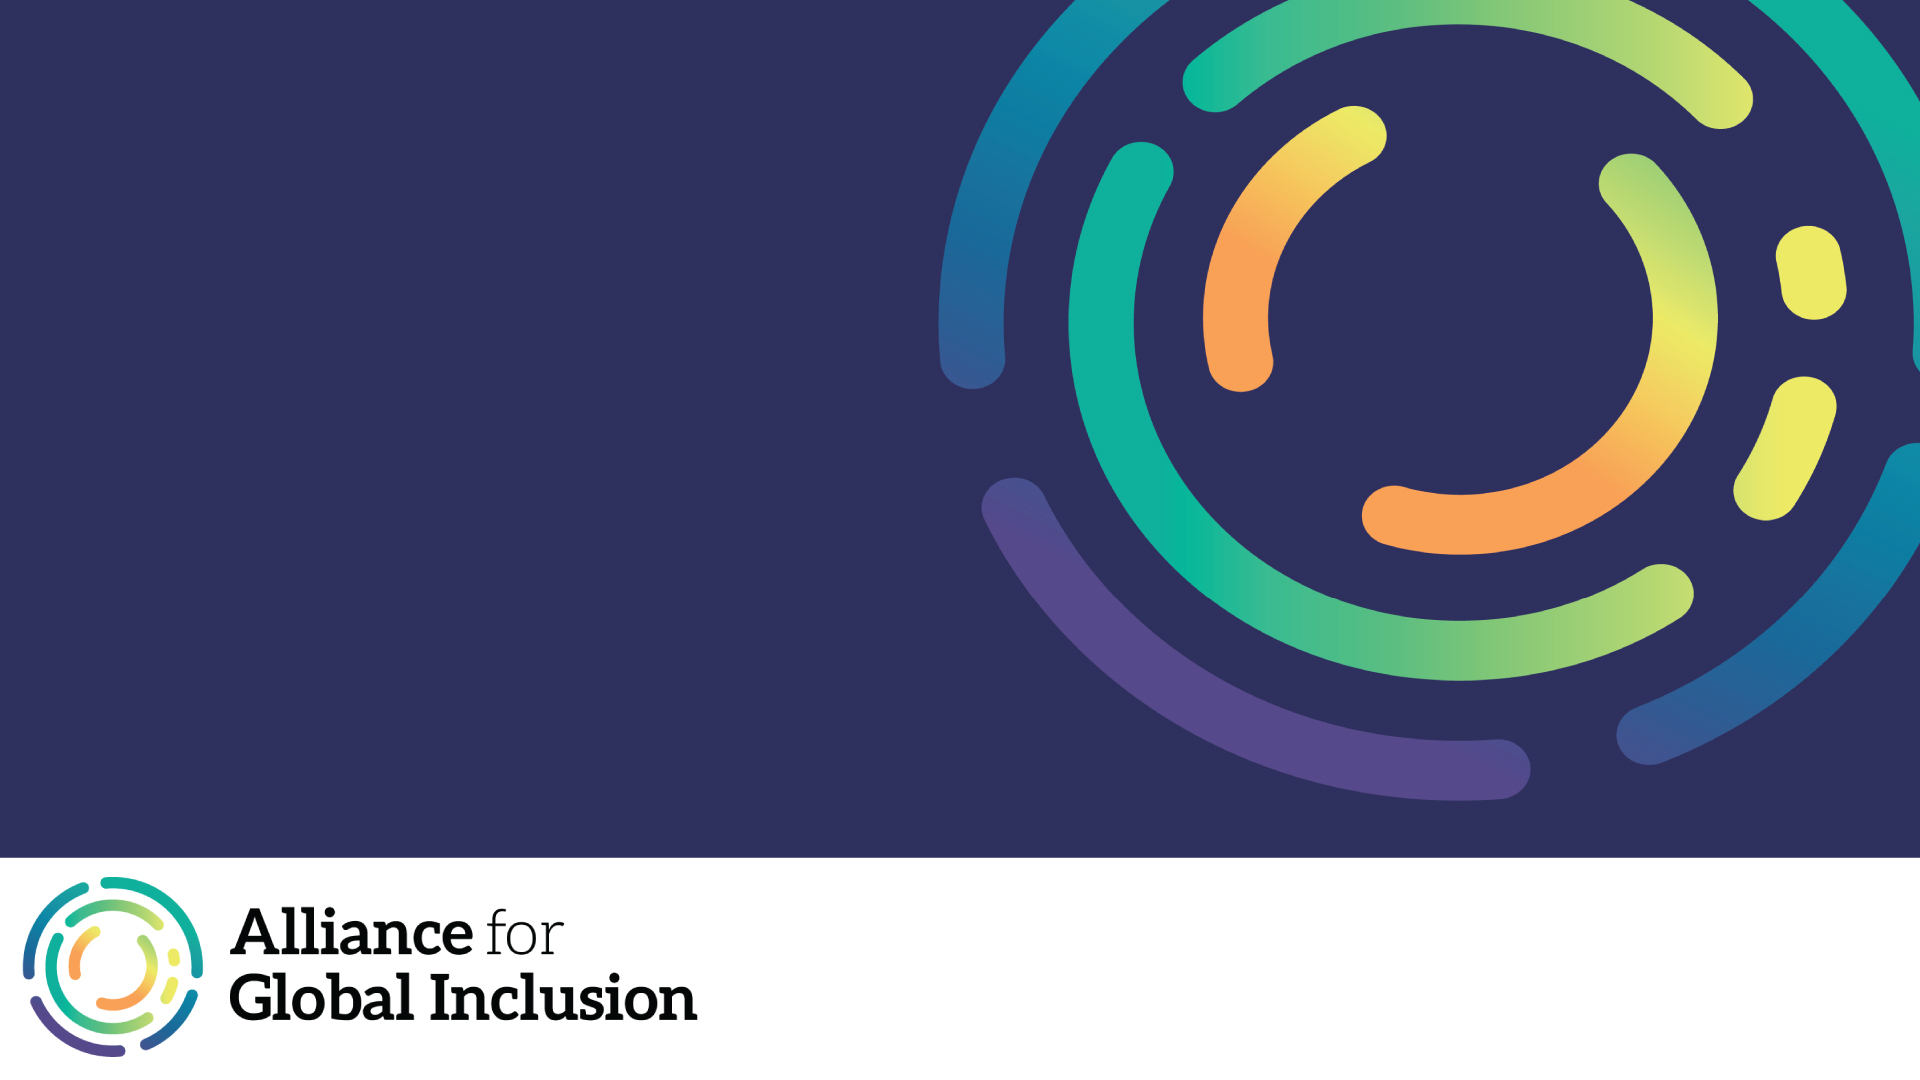 A purple background with the Alliance for Global Inclusion pictorial mark in the upper right corner, across the bottom is a white bar with the Alliance pictorial mark and the words "Alliance for Global Inclusion" on the left side.